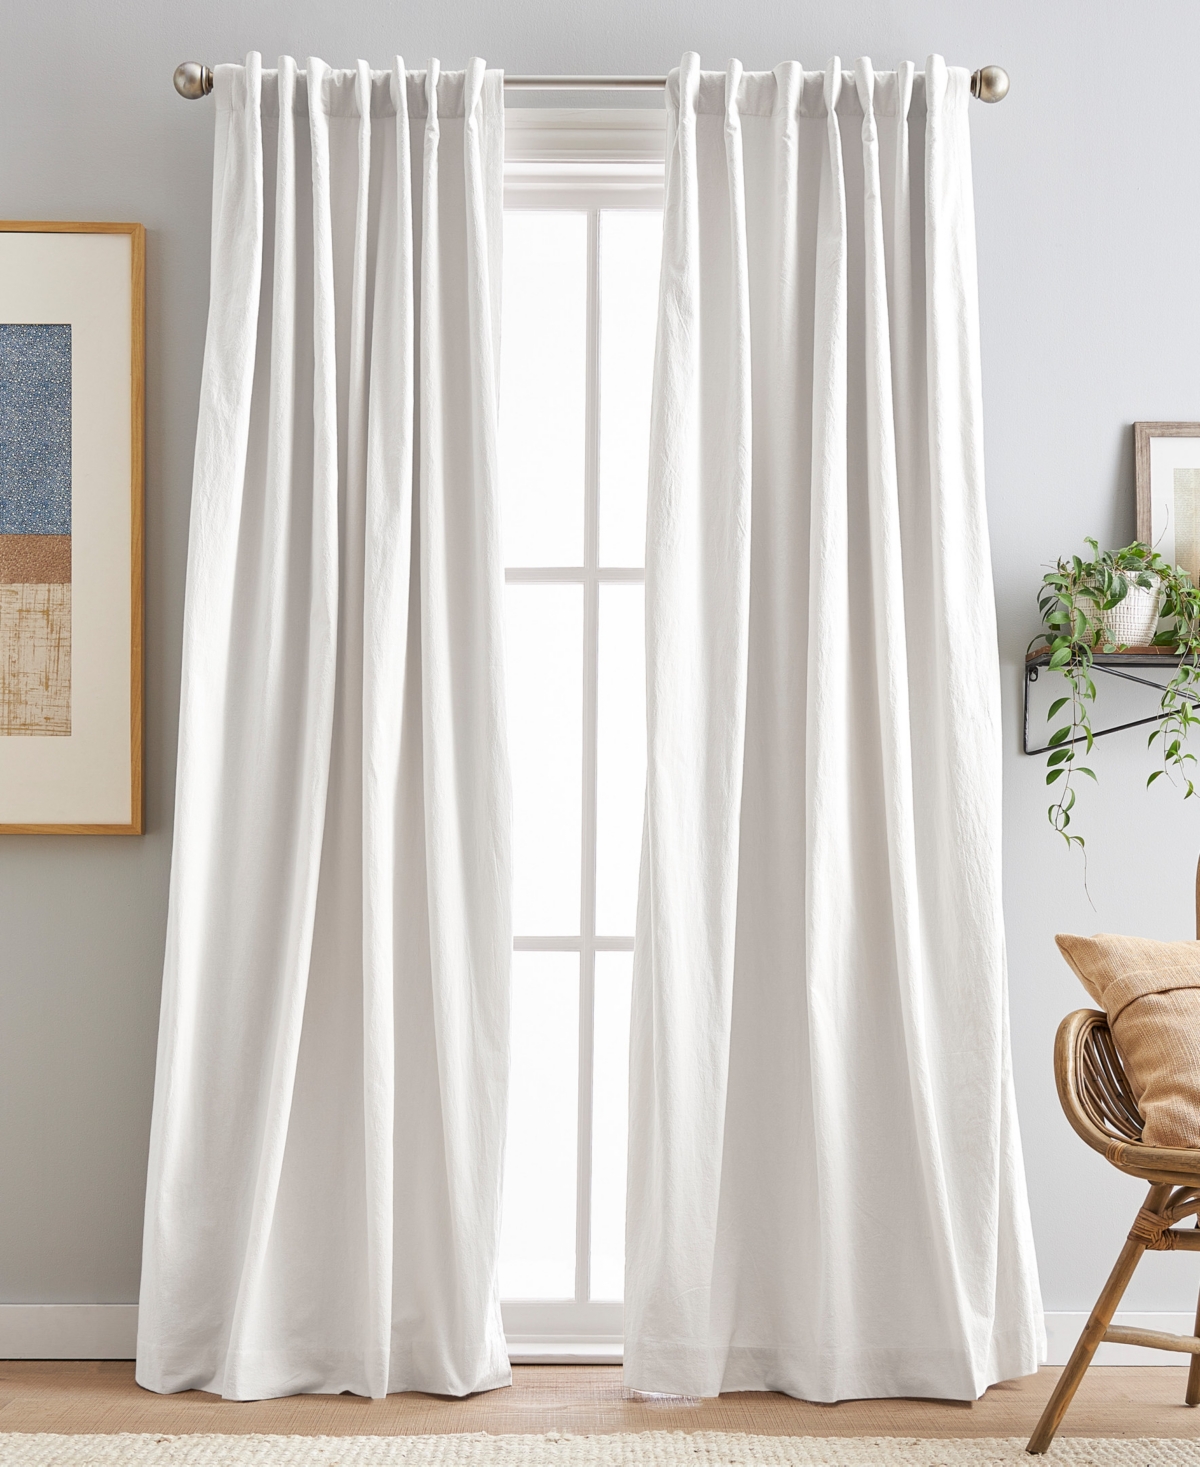 Peri Home Sanctuary Back Tab Lined 2-piece Curtain Panel Set, 50" X 95" In White